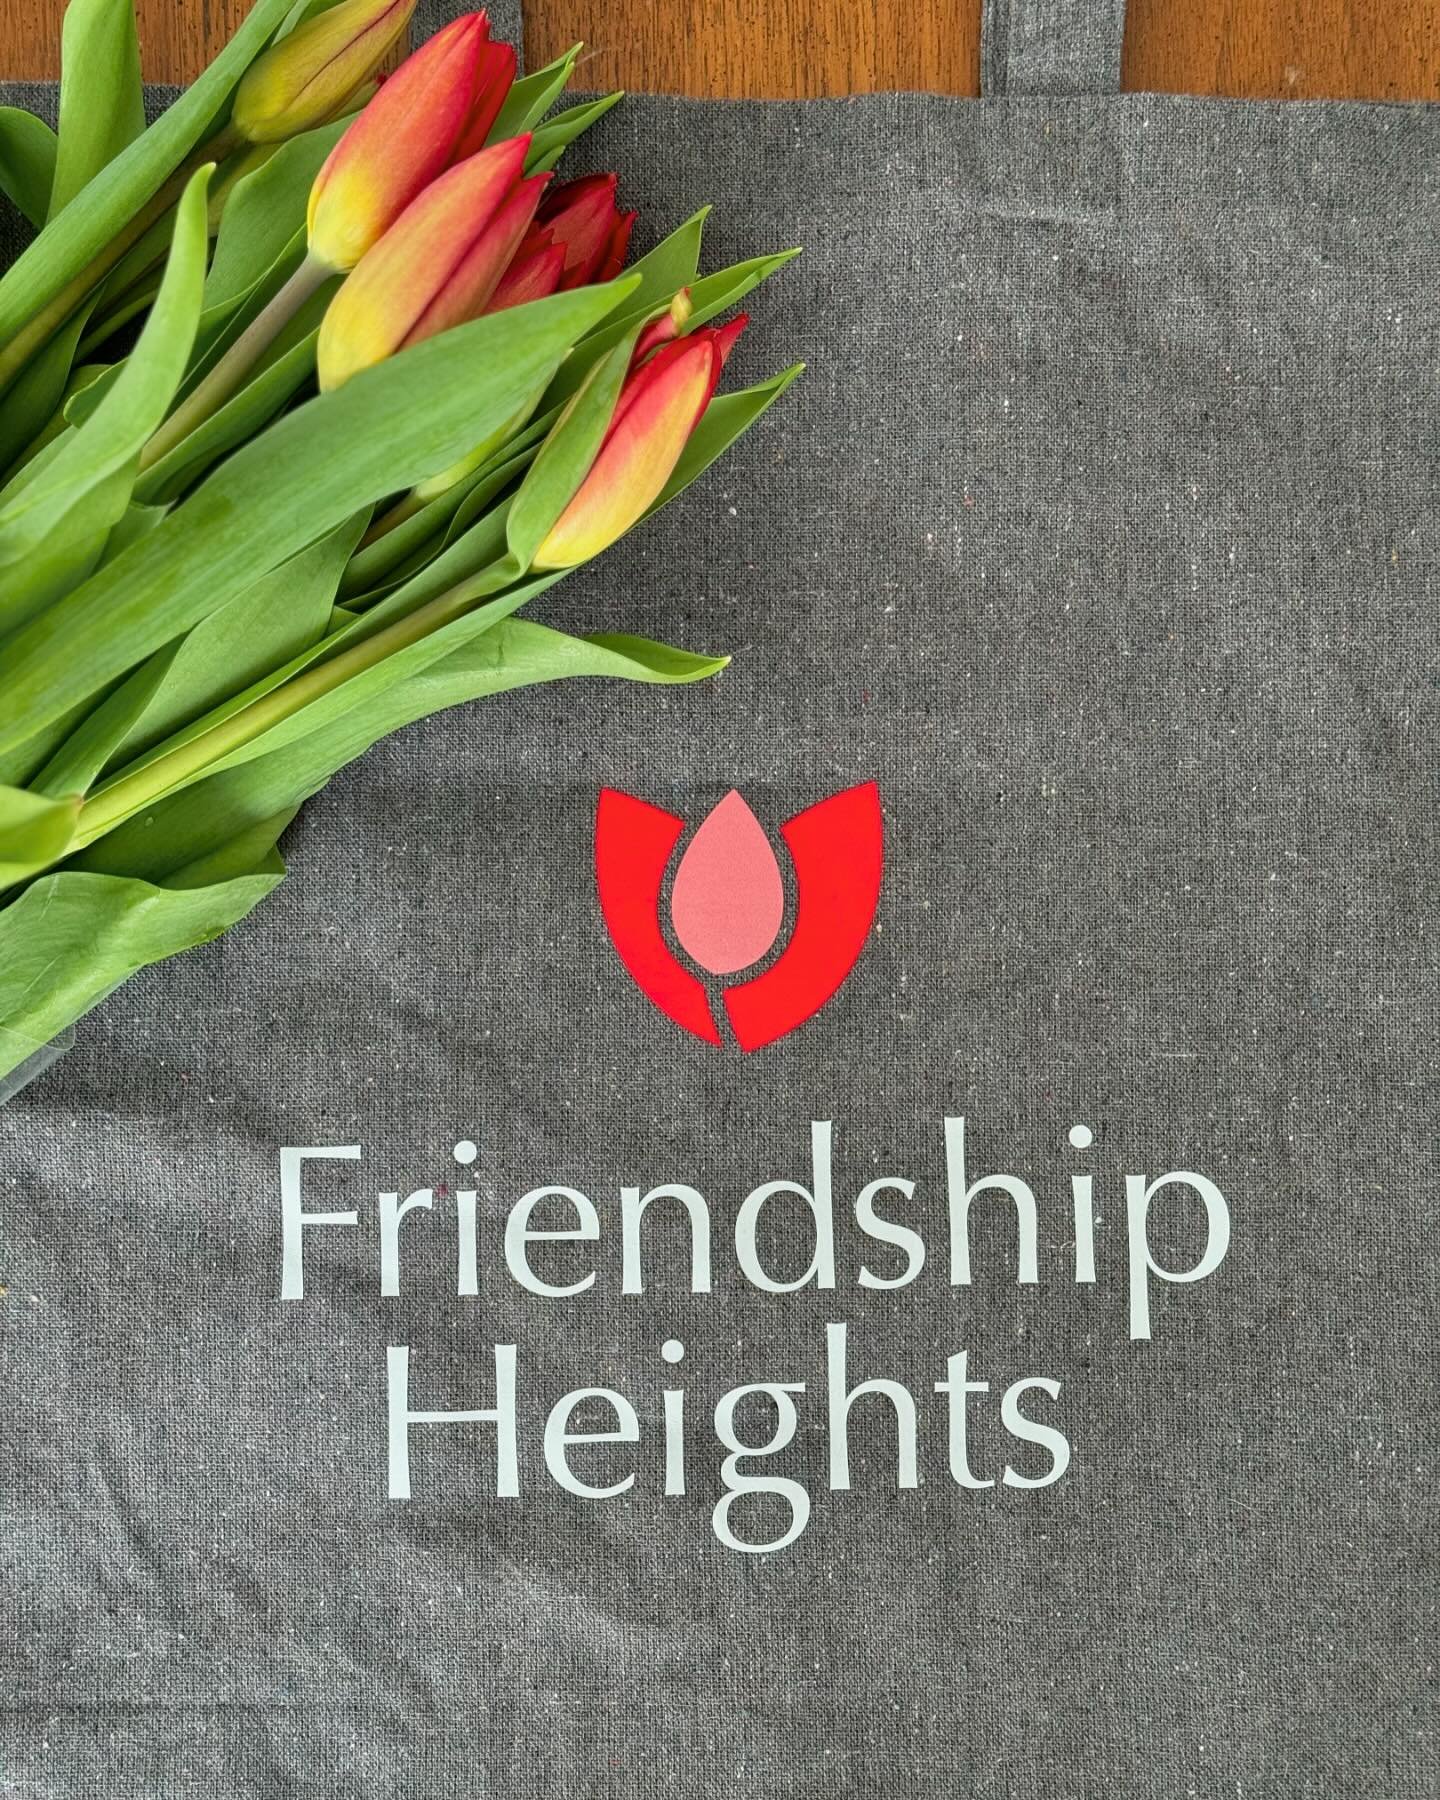 Sporting my @friendshipheightsalliance tote this morning to pick up some springtime cheer 🌷. The debut of this logo for the new Friendship Heights neighborhood alliance was inspired by the approachable happy tulip, known as a symbol of new beginning